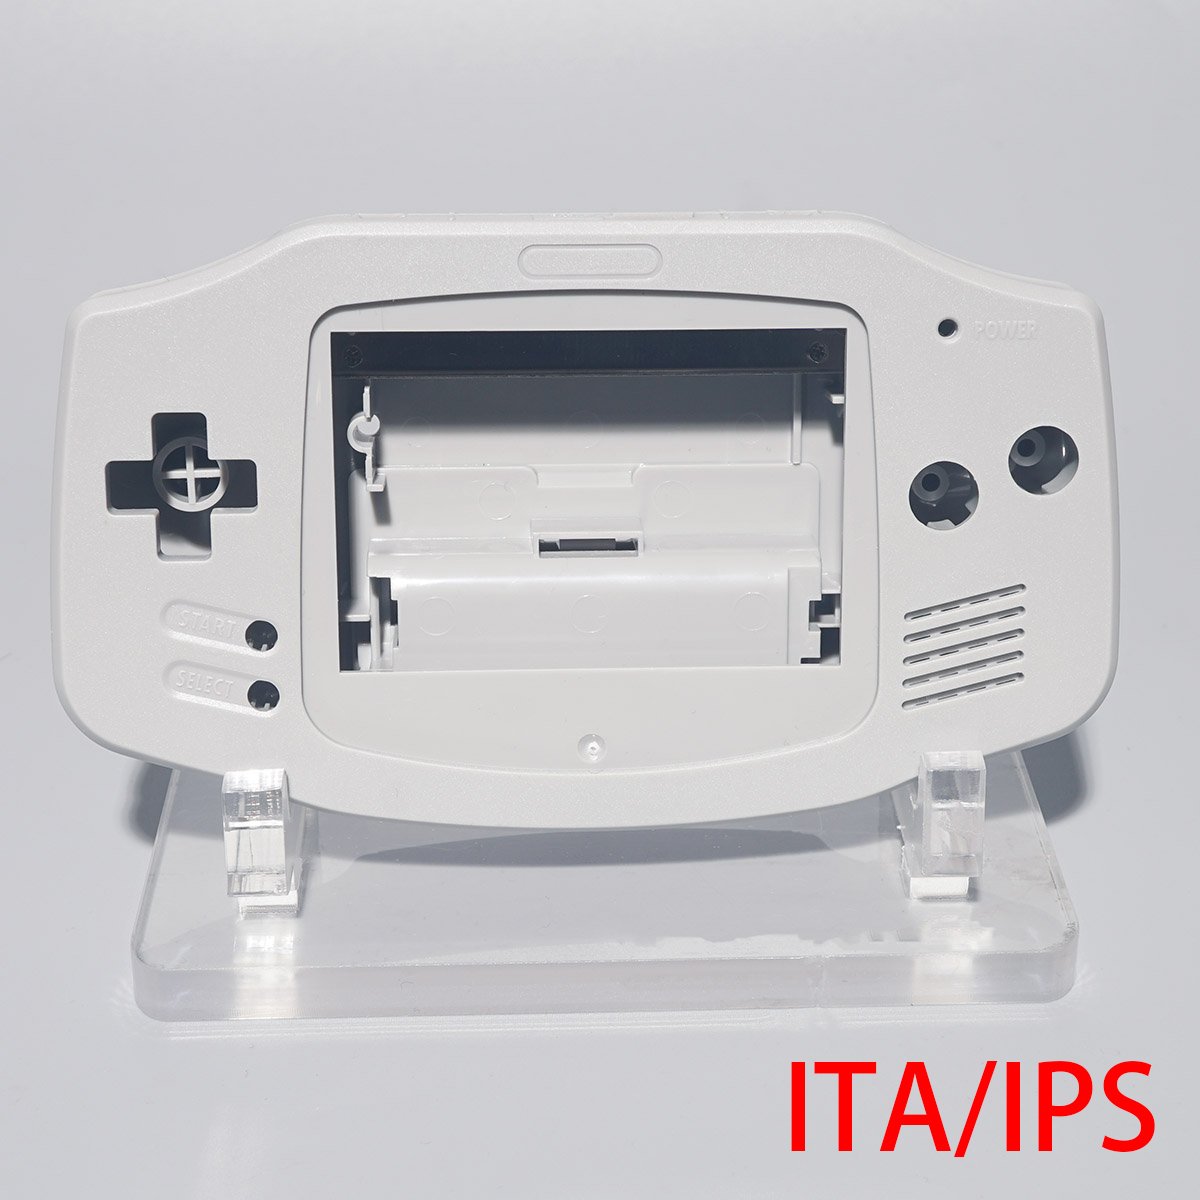 Game Boy Advance SP Limited Edition Retro NES Console with Drop-In IPS LCD  & built-in PSD Menu! : r/Gameboy